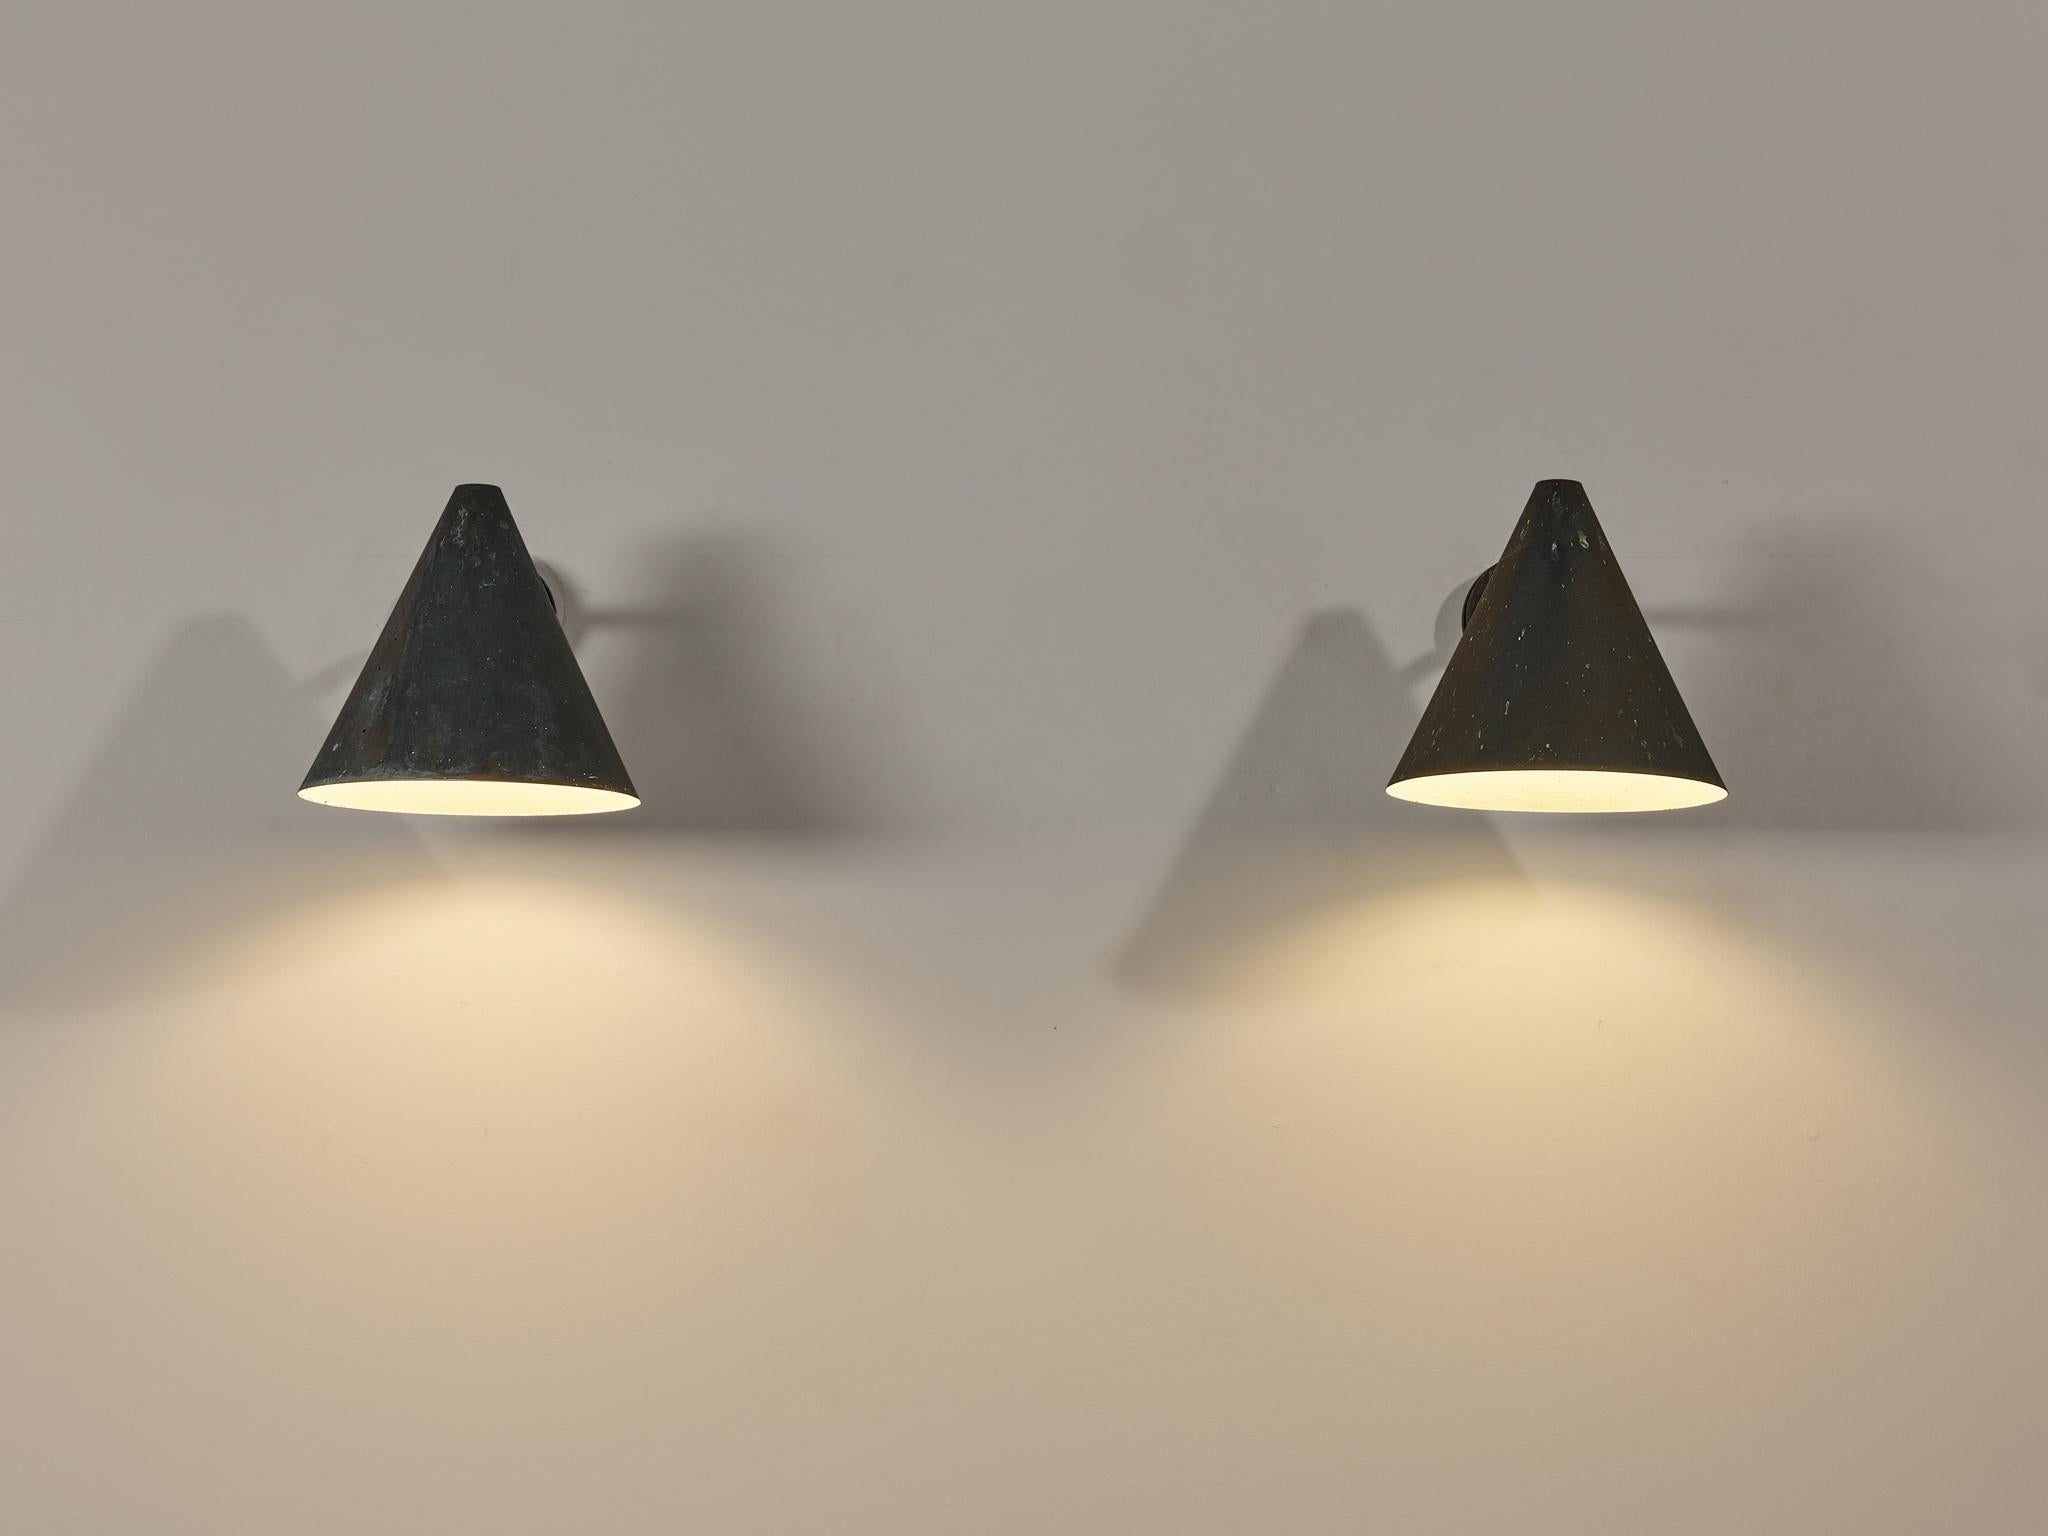 Hans-Agne Jakobsson 'Tratten' Wall Lights in Patinated Copper